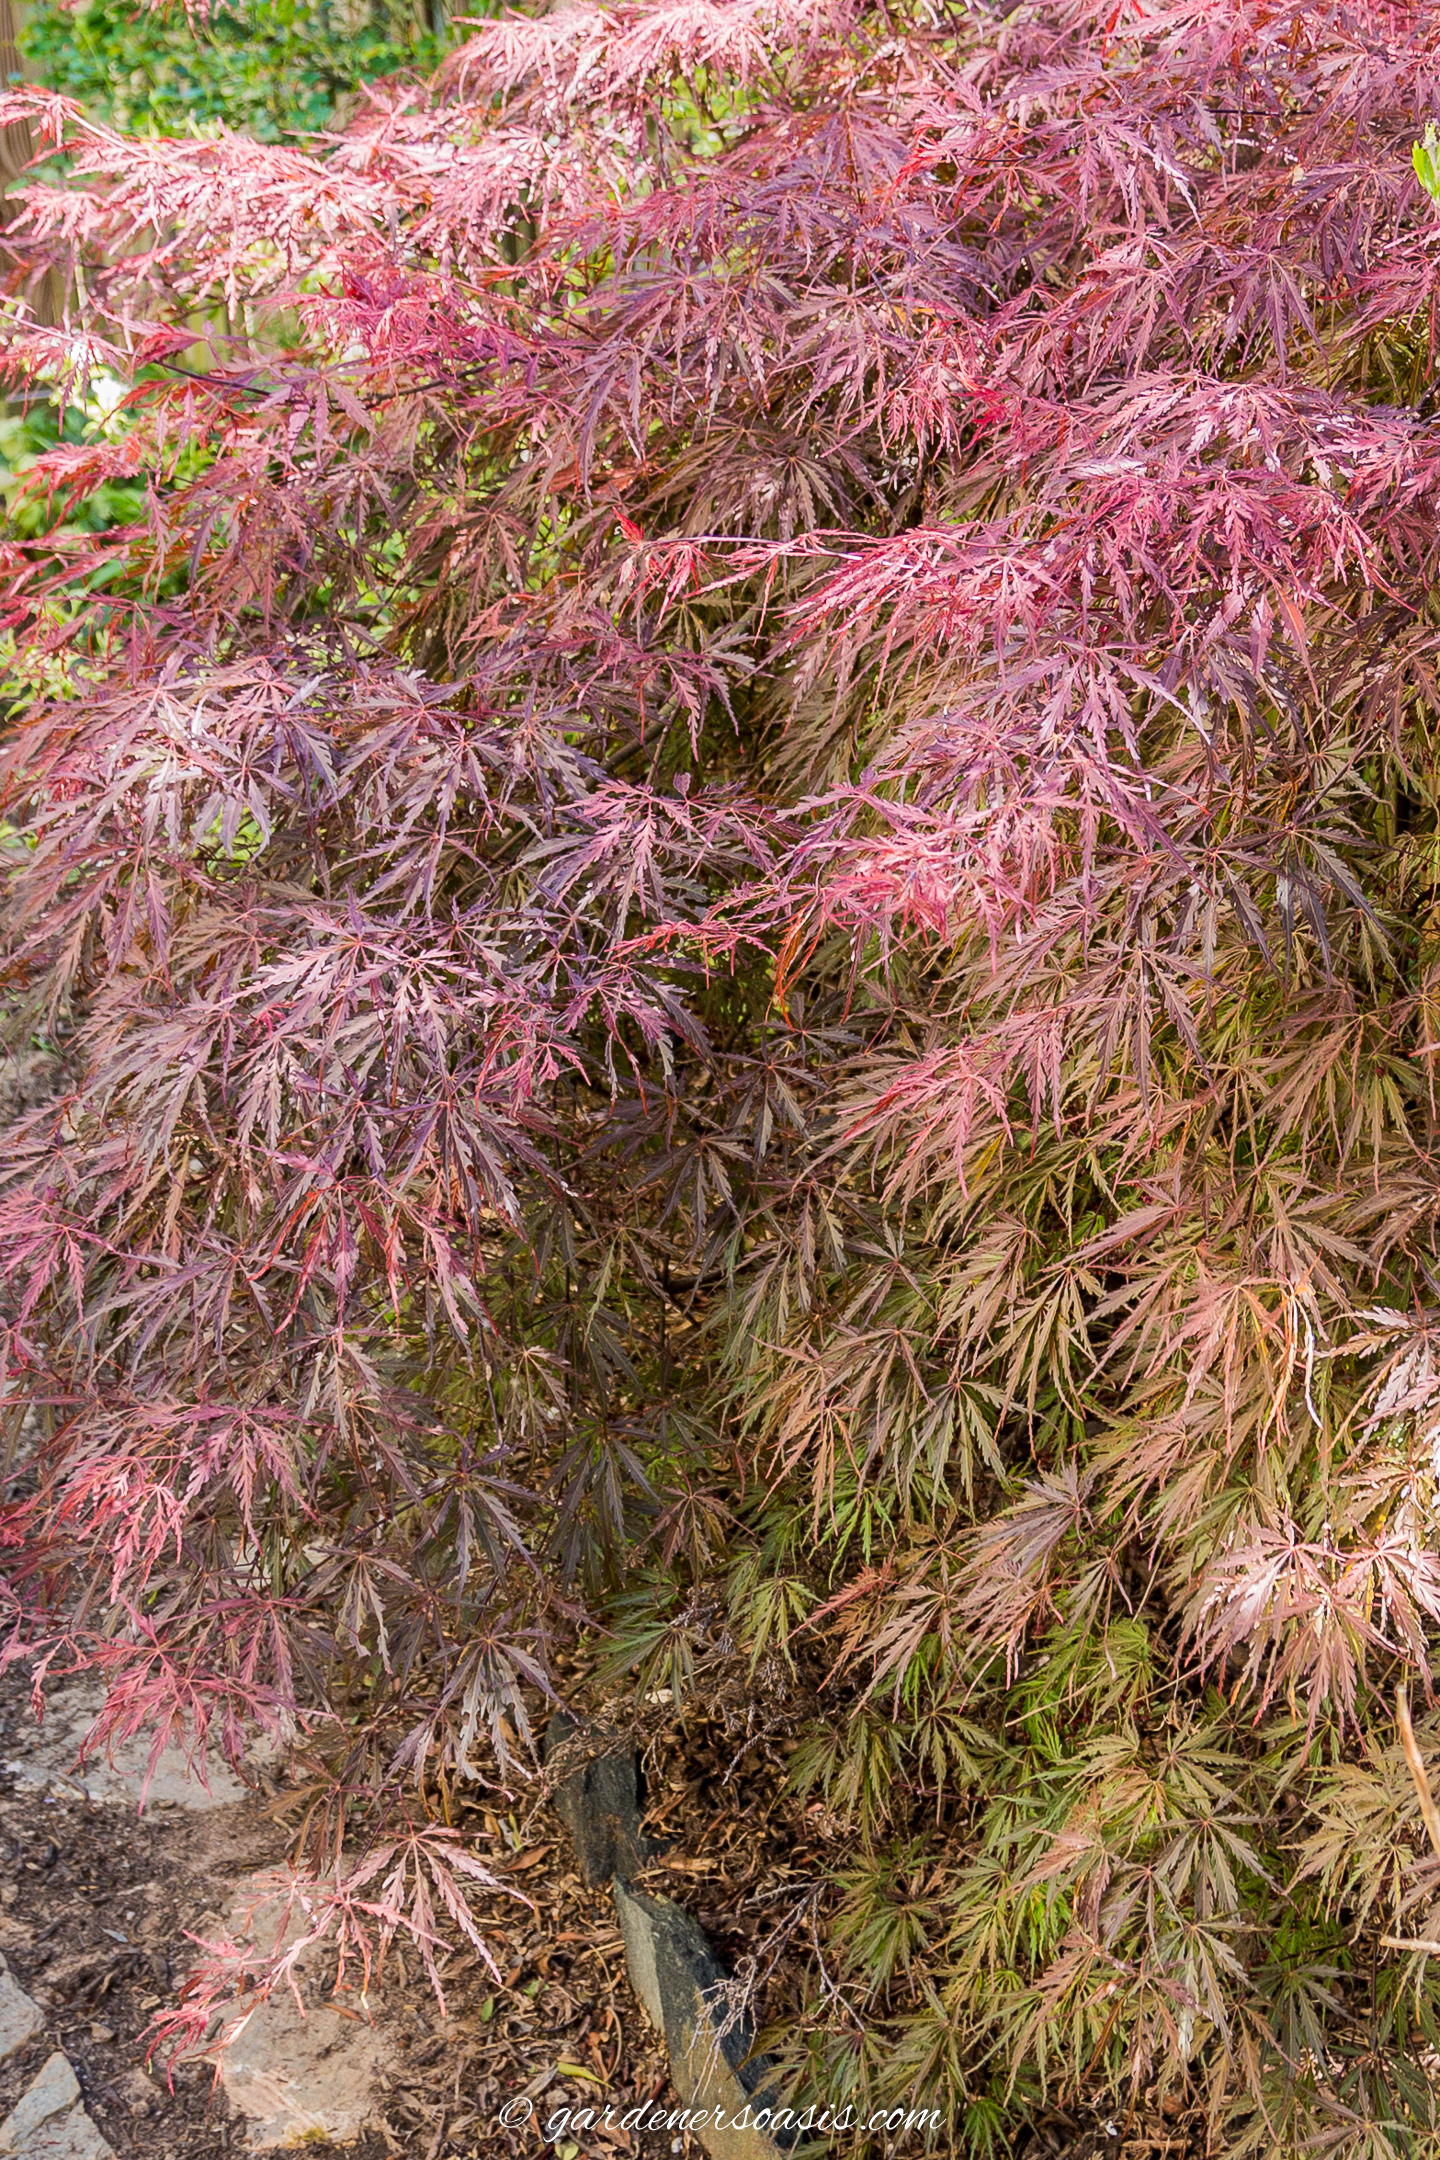 Leaf color is better in some sun | 10 Surprising Things About Growing Beautiful Japanese Maples | If you want to add a Japanese Maple to your landscape (or you already have one growing in your garden) but aren't sure how to care for it, these tips on fertilizing, pruning and growing in containers (among other things) are very helpful!